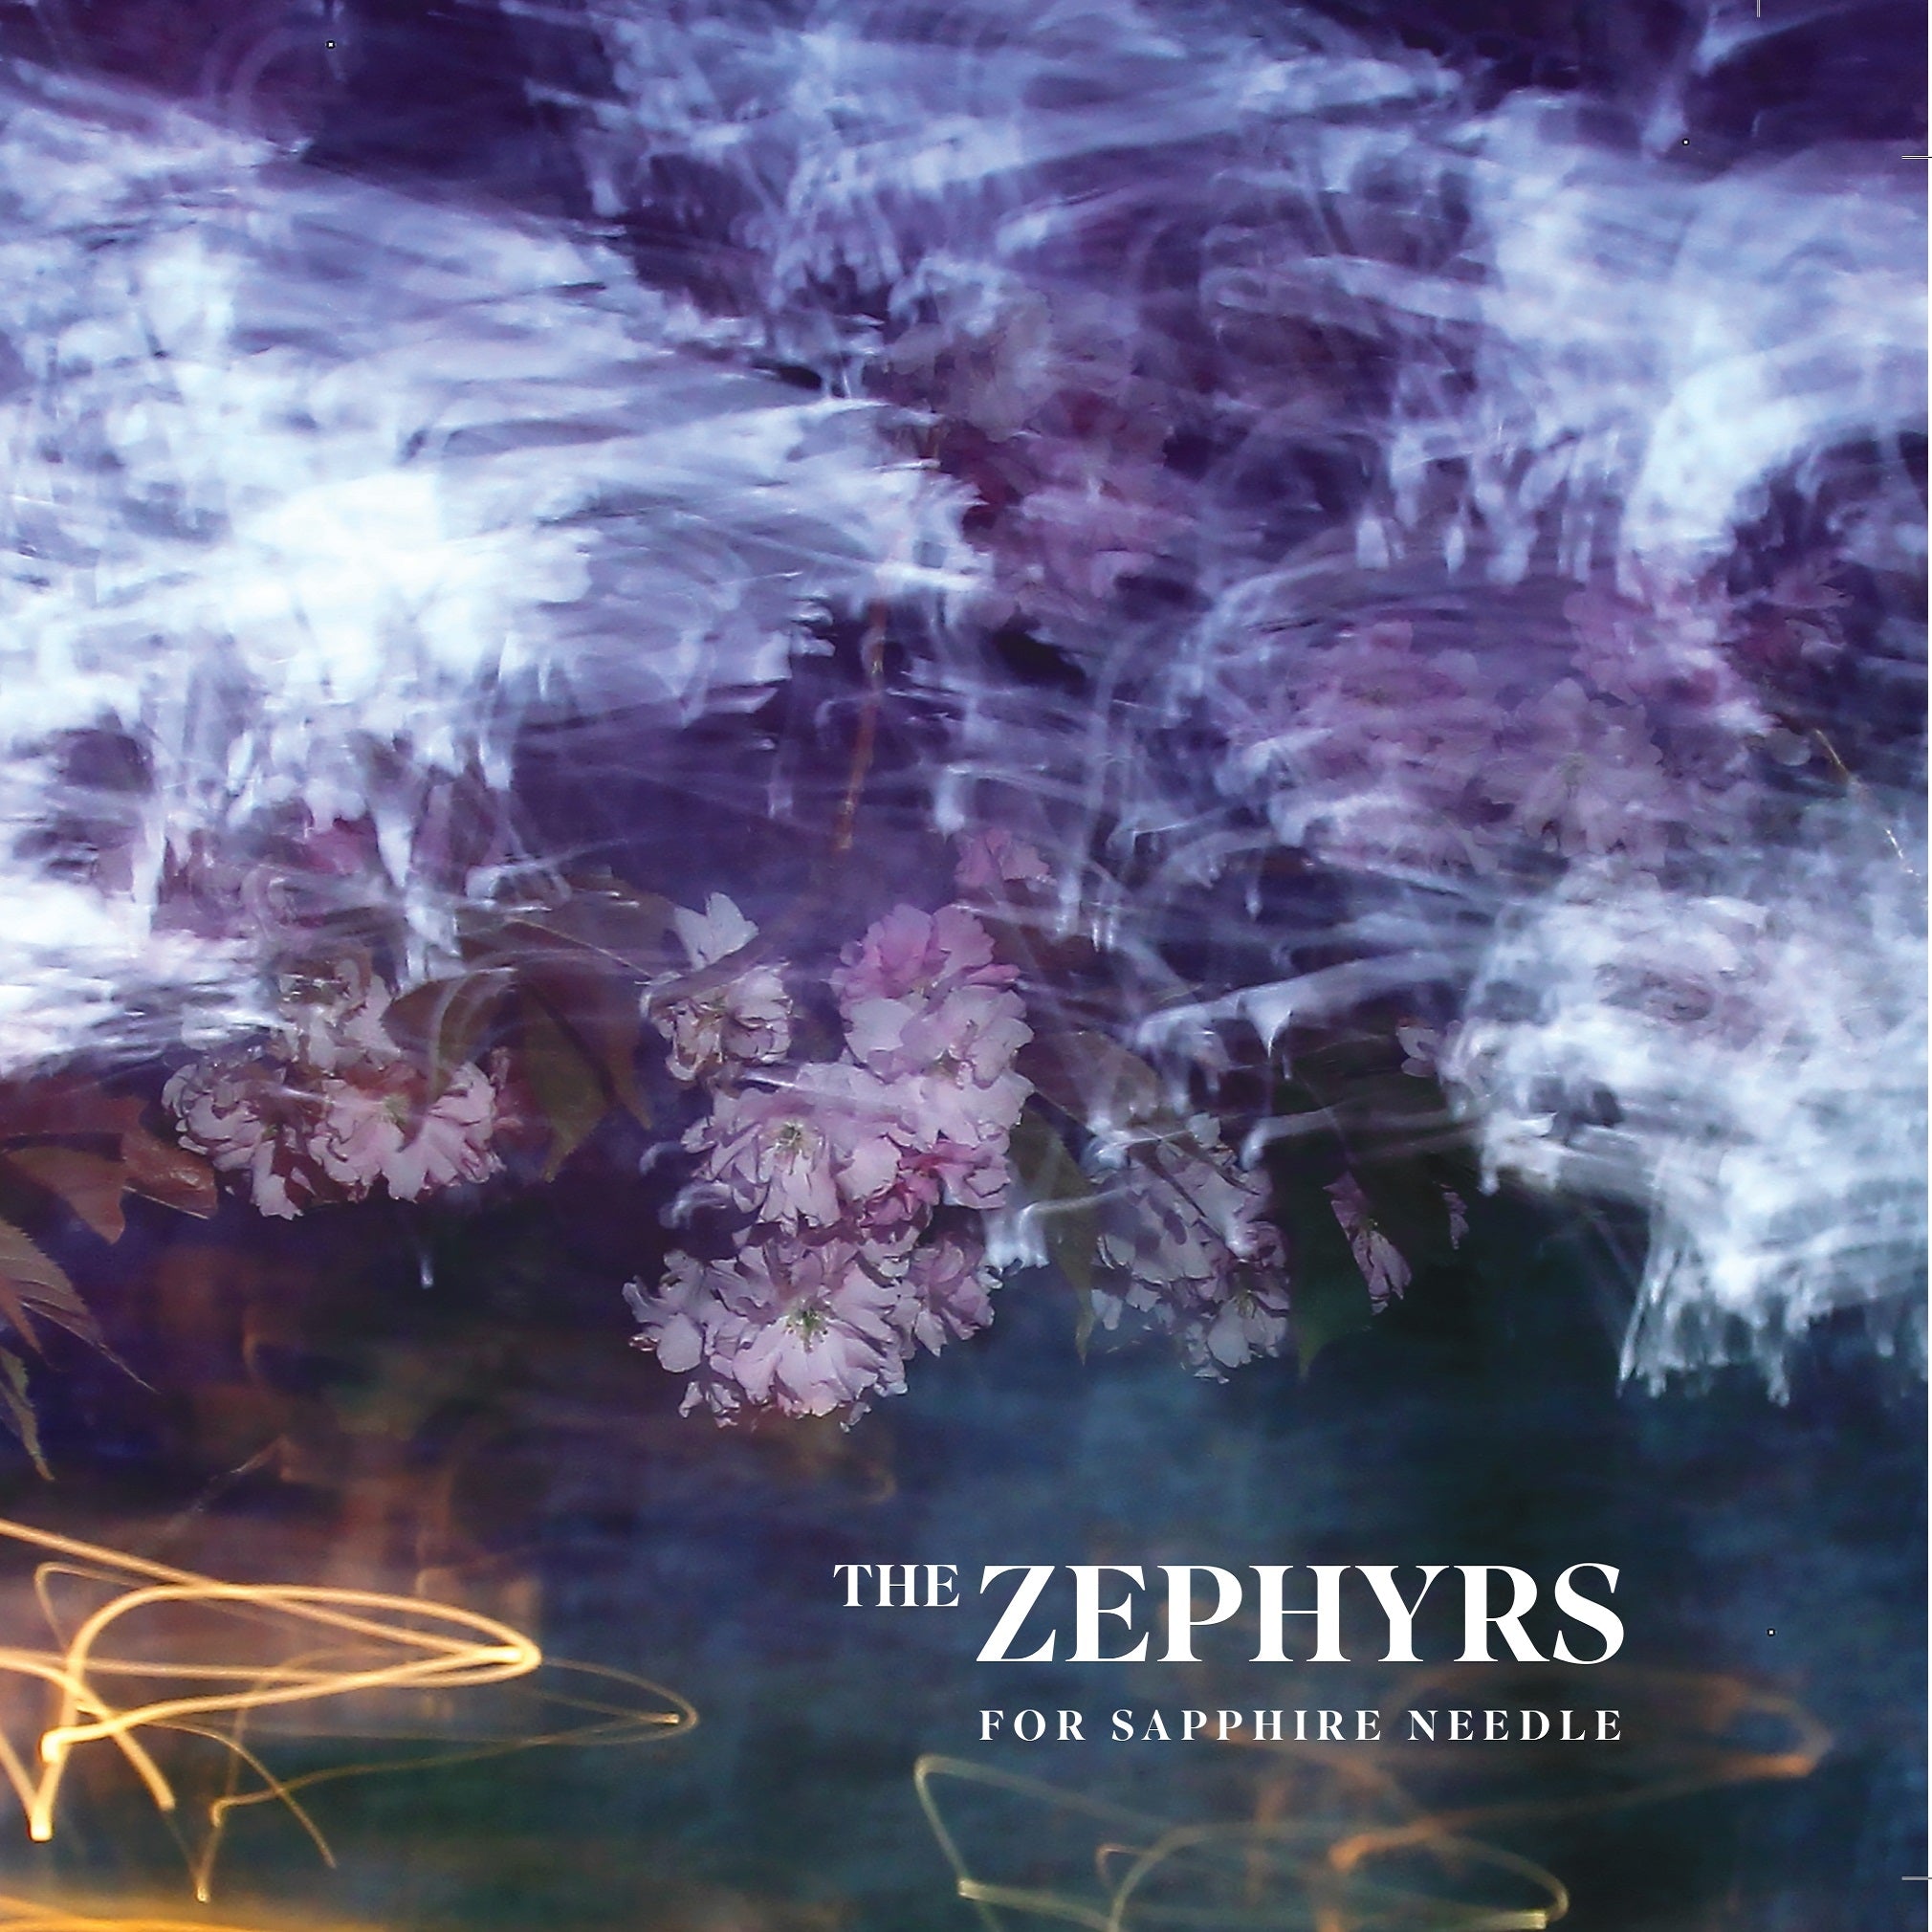 Zephyrs, The - For Sapphire Needle